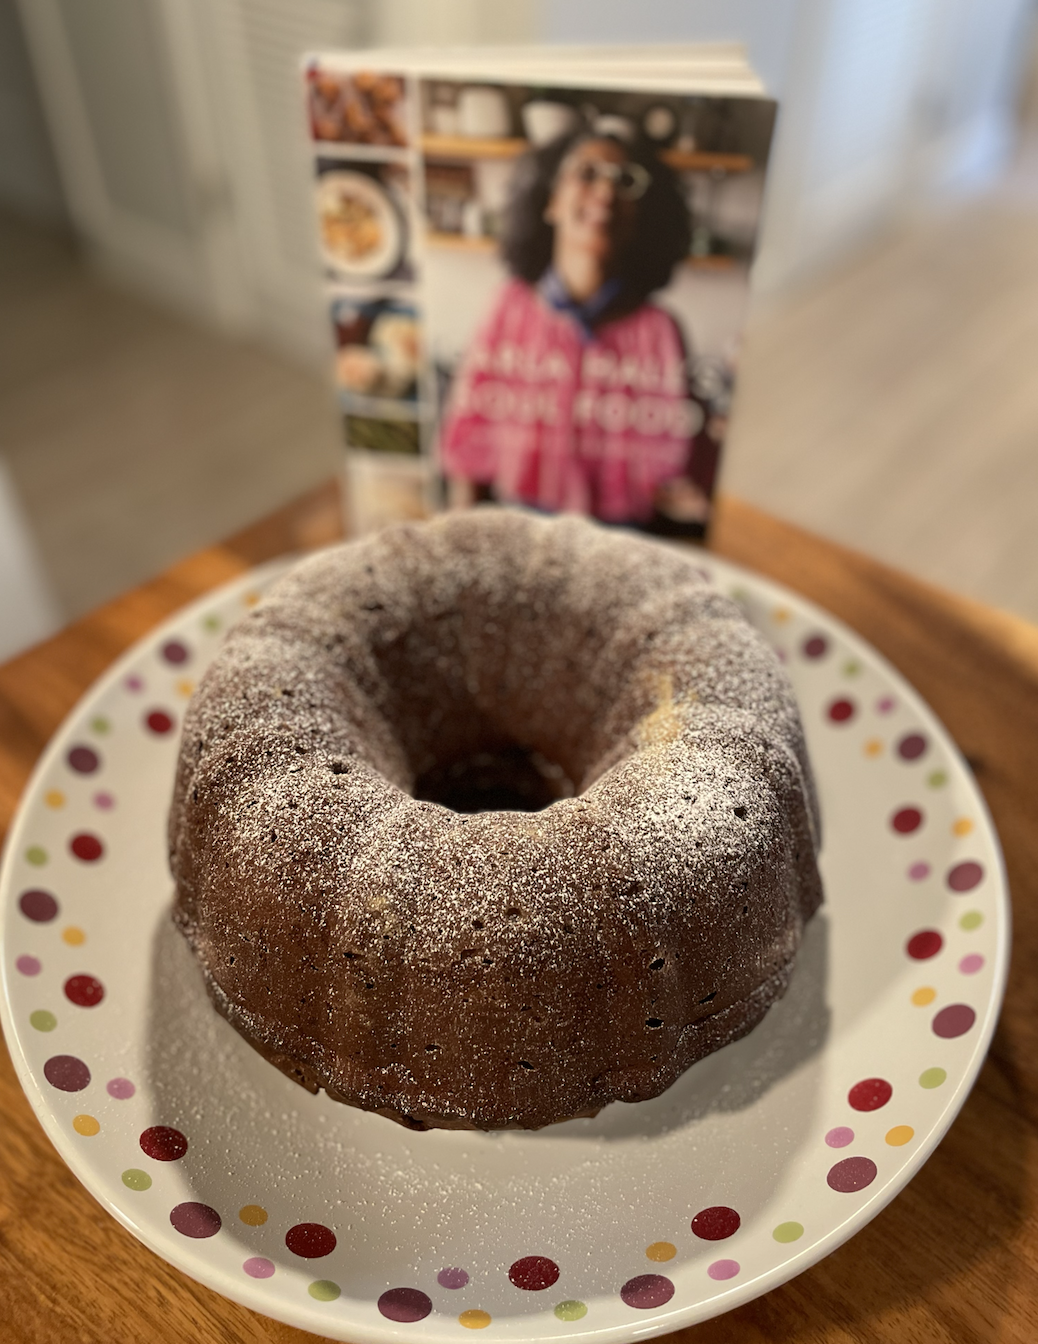 Photo of a chocolate bundt cake dusted with powdered sugar on a dotted serving platter on a wooden table with the cookbook Carla Hall's Soul Food